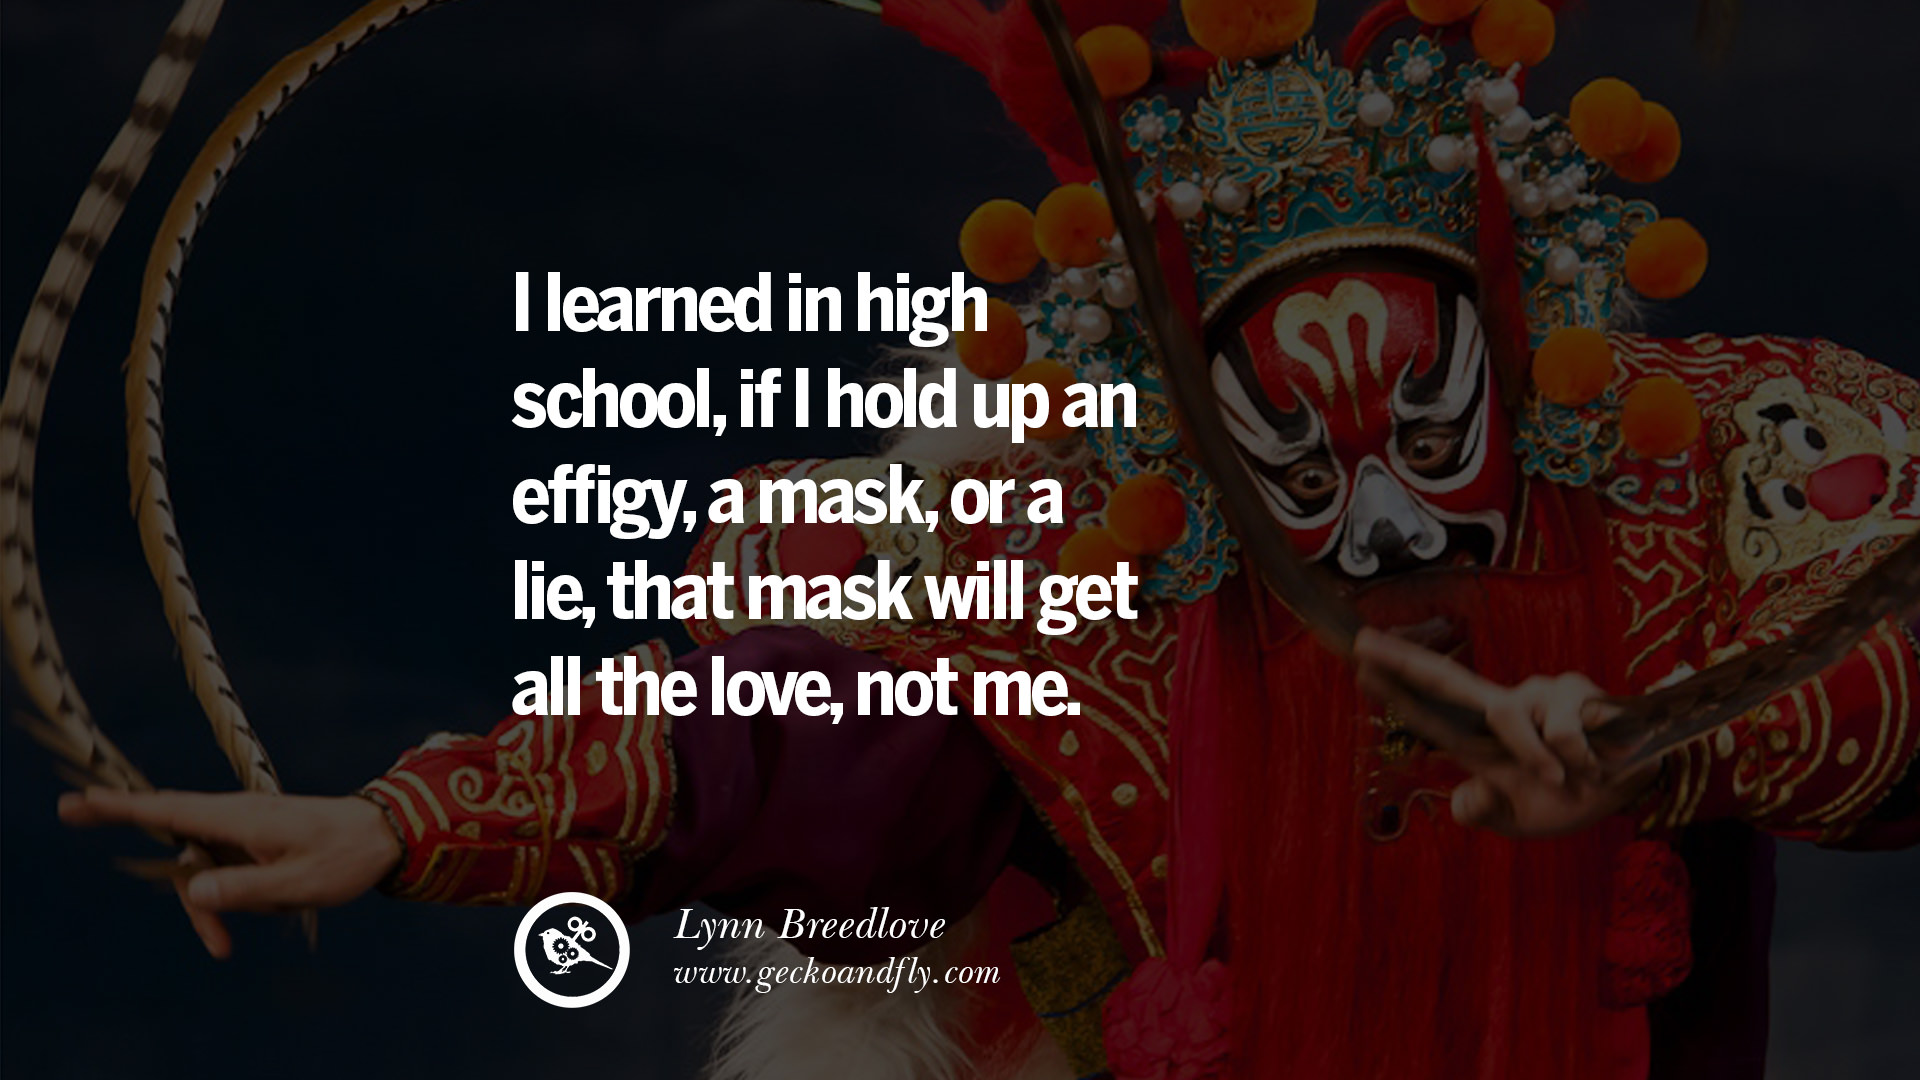 24 Quotes on Wearing a Mask, Lying and Hiding Oneself